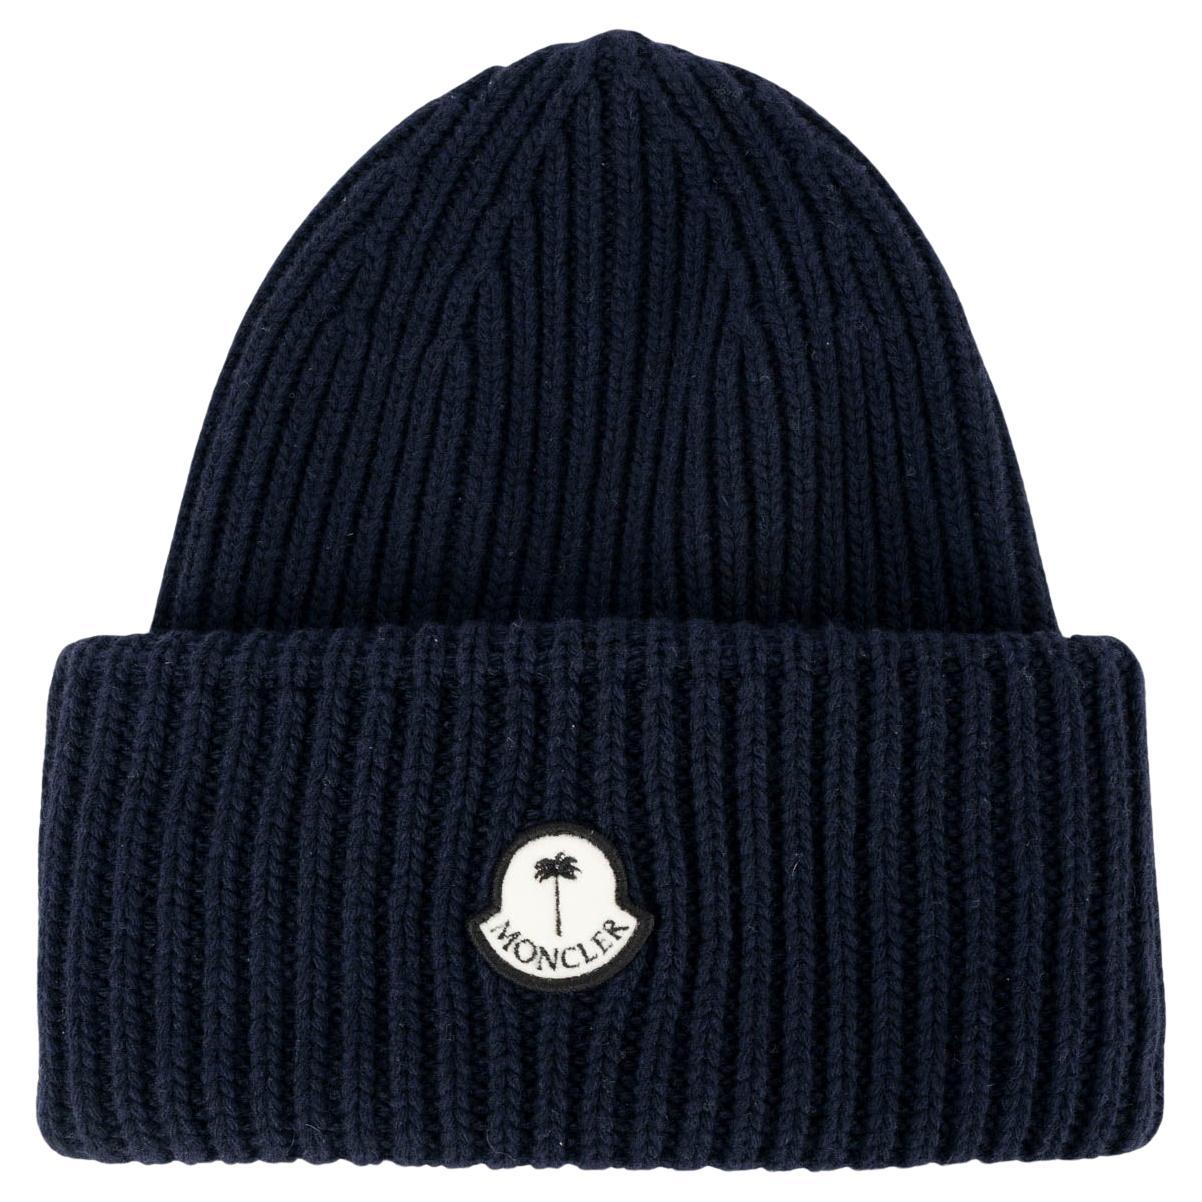 MONCLER x PALM ANGELS navy blue wool KNIT Beanie Knit Hat One Size